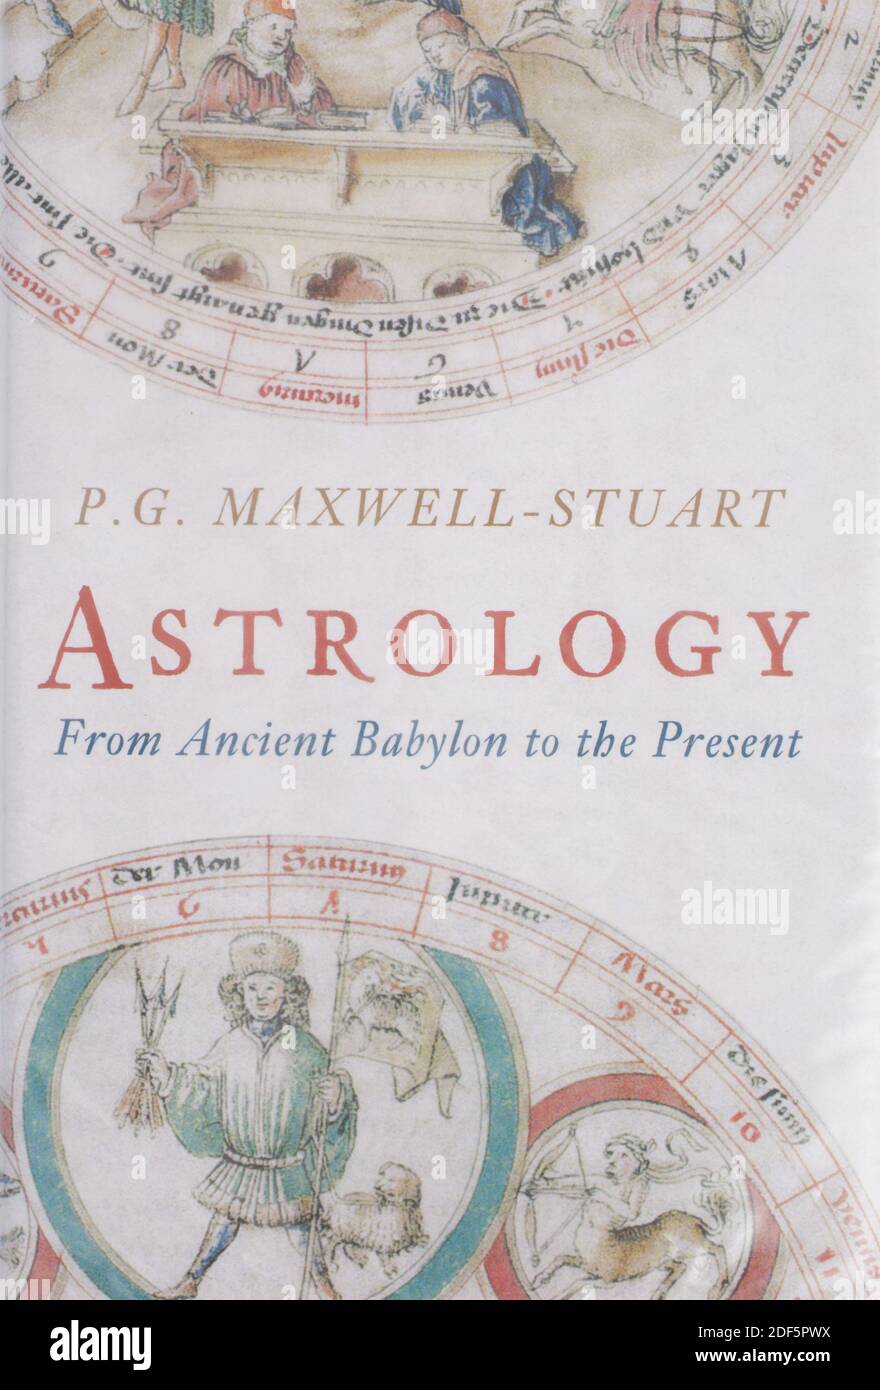 The book, Astrology, from ancient Babylon to the present by P G Maxwell-Stuart Stock Photo